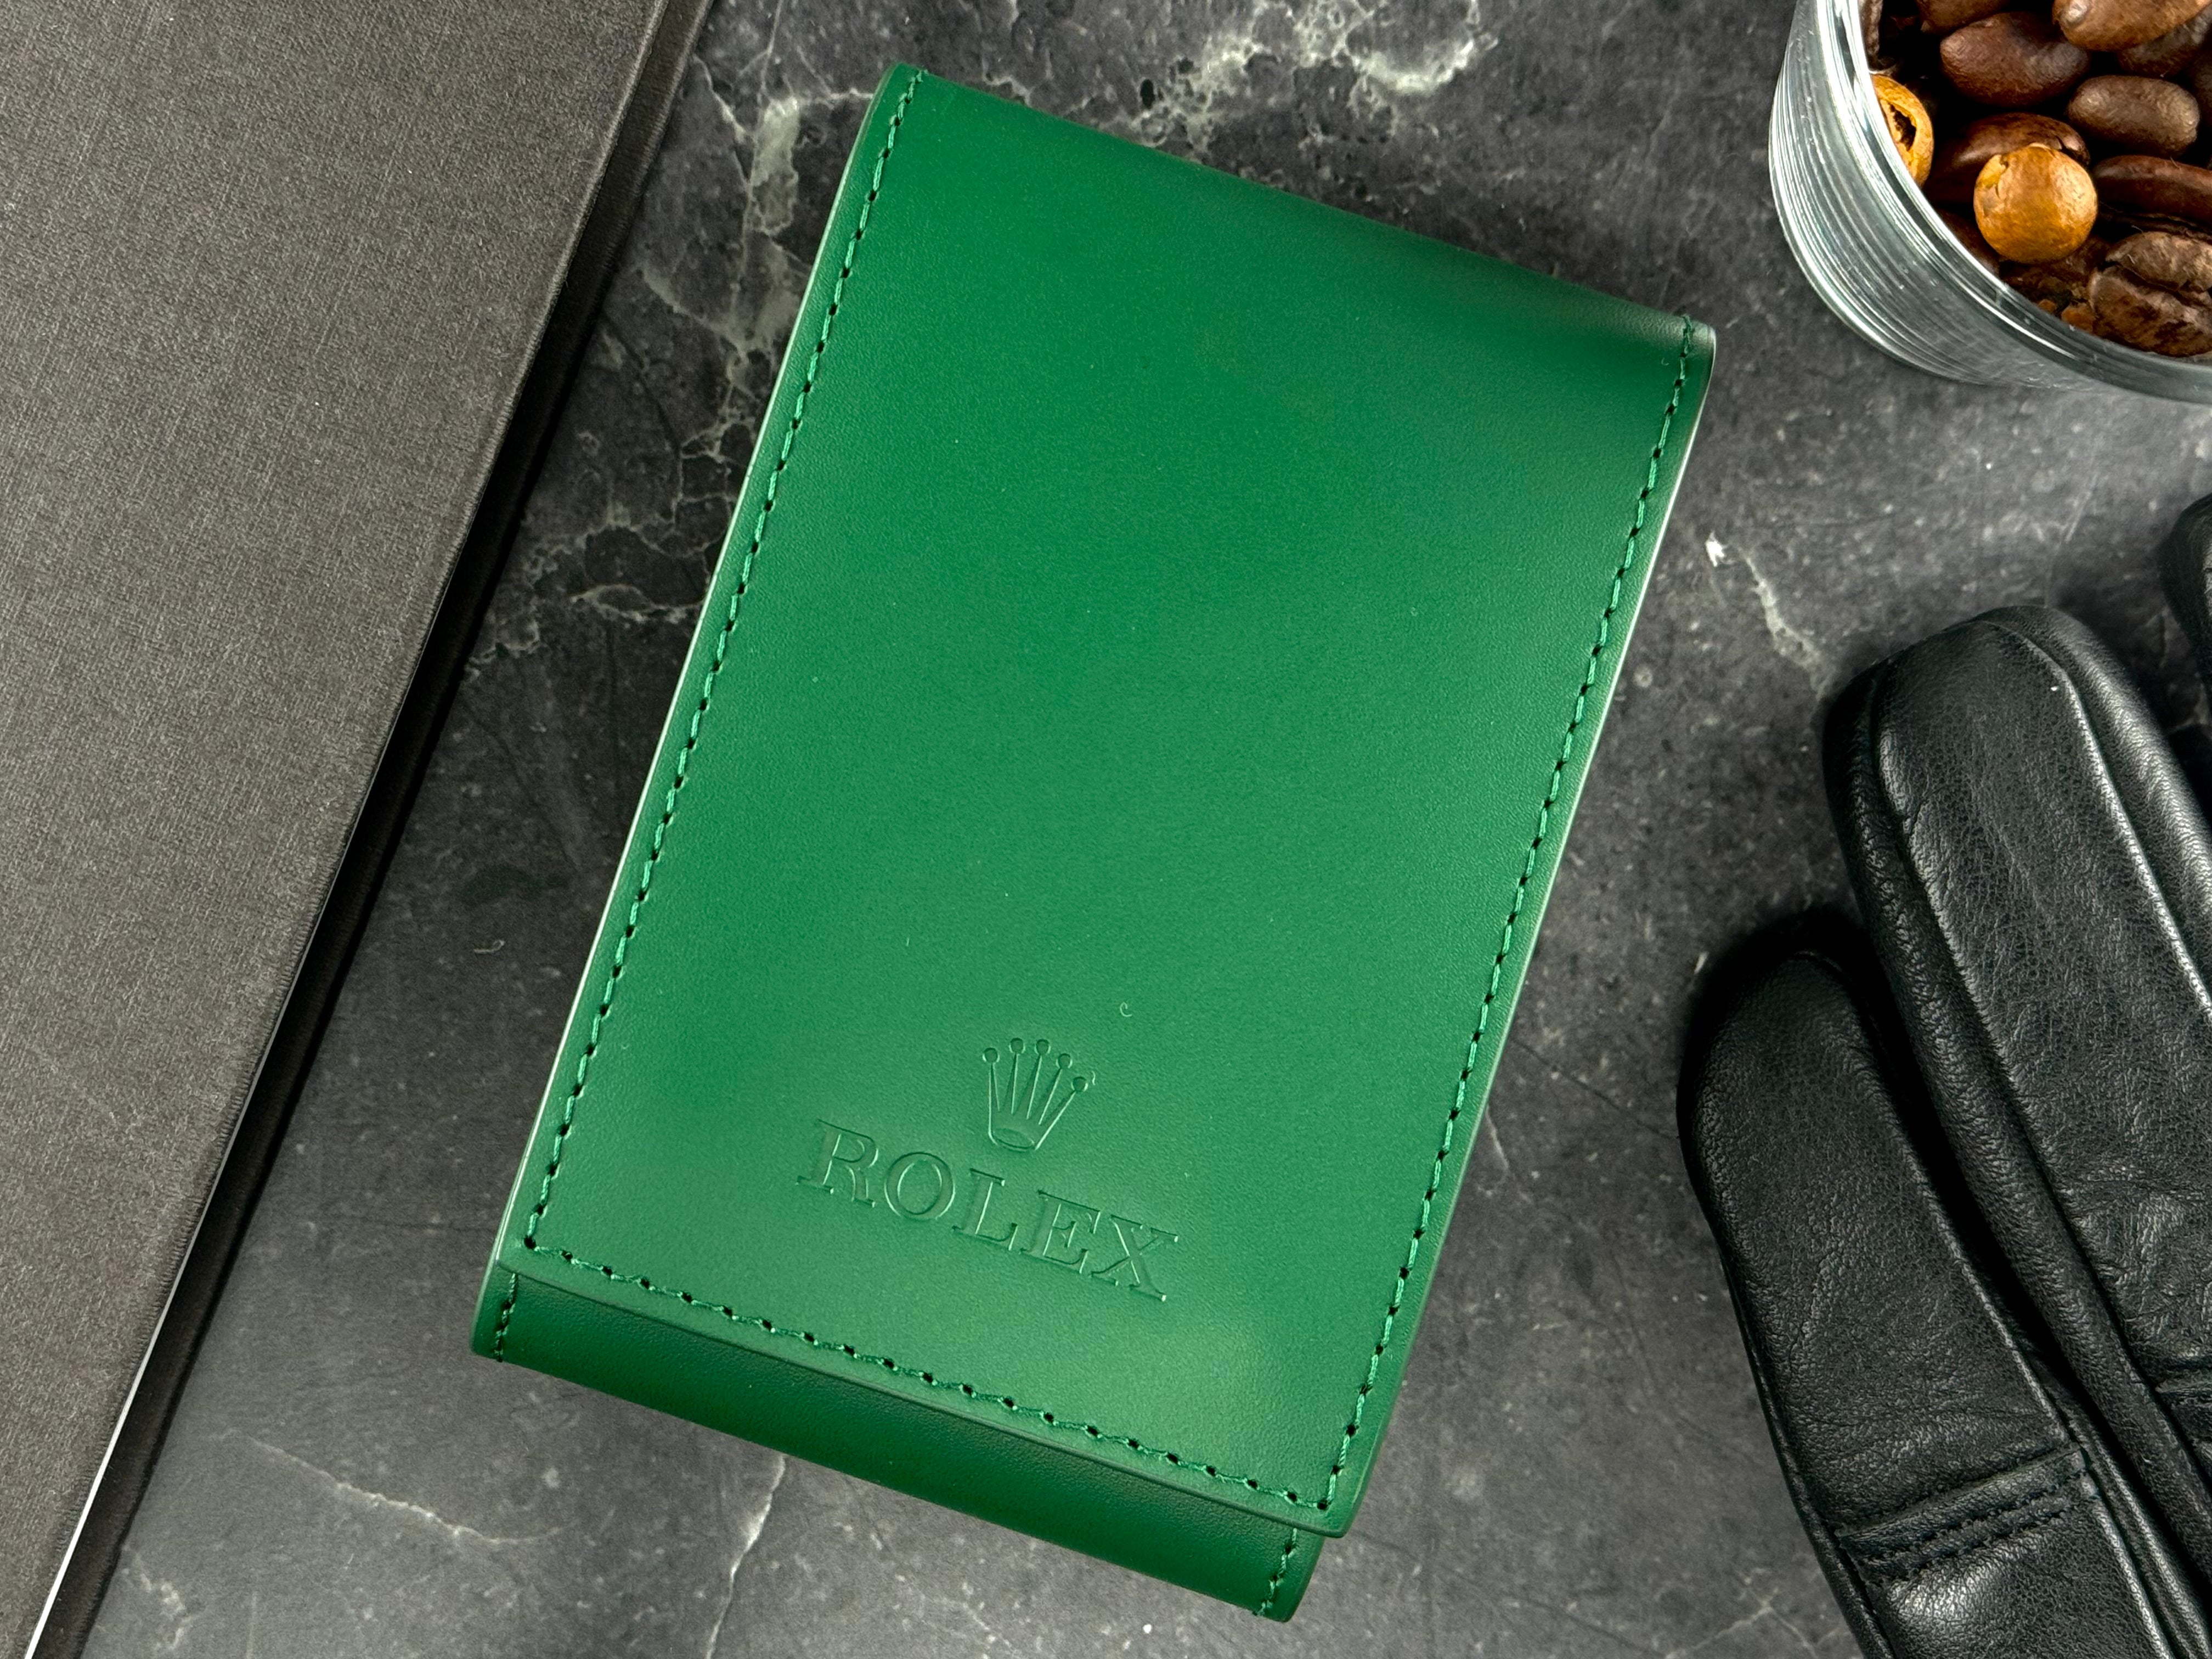 Rolex watch case with green outer box